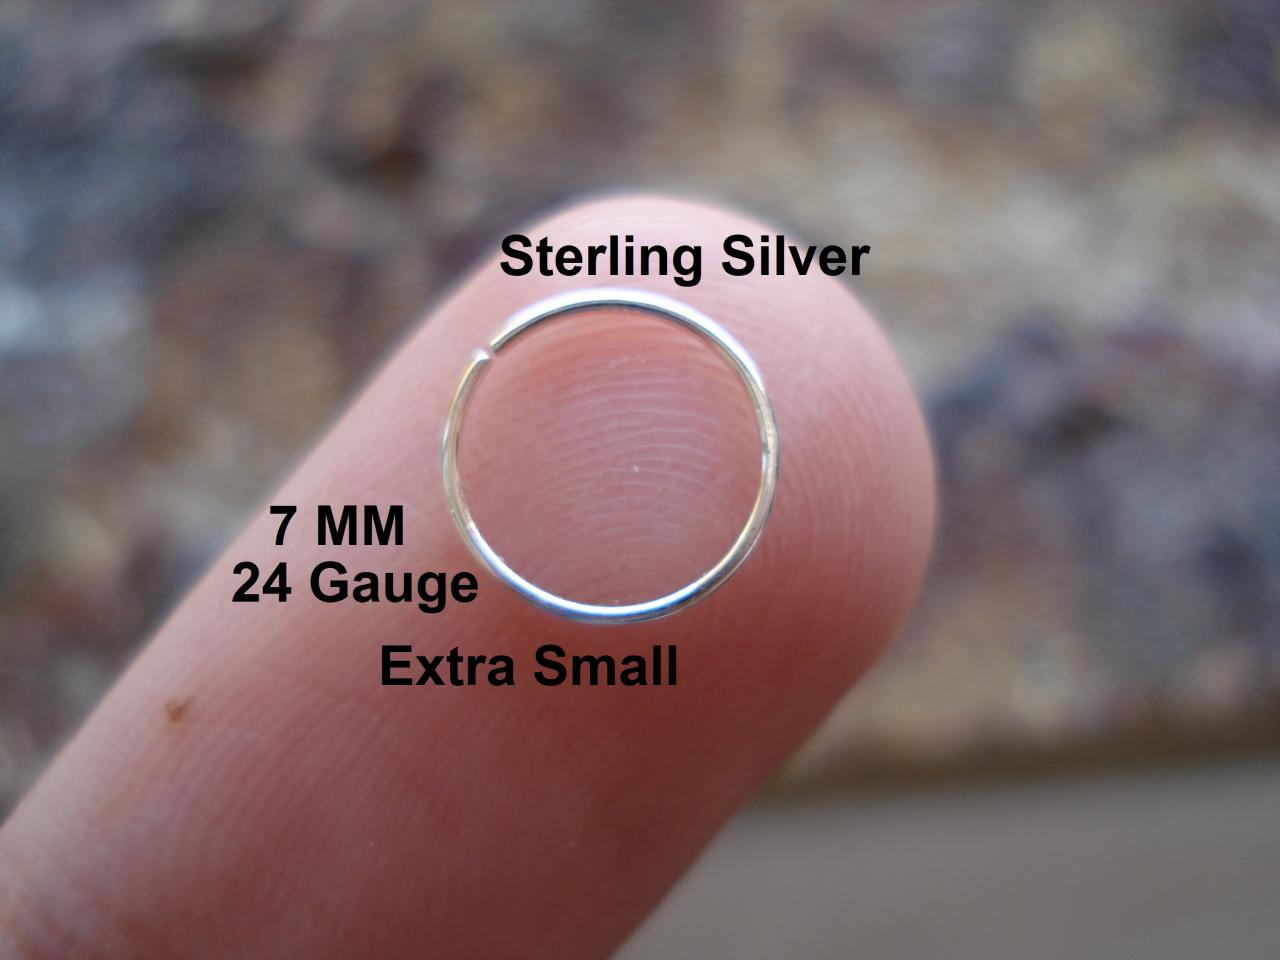 Extra Small 24g Gauge Sterling Silver For Nose Ring/hoop Helix/earring/tragus,7 Mm Inner Diameter